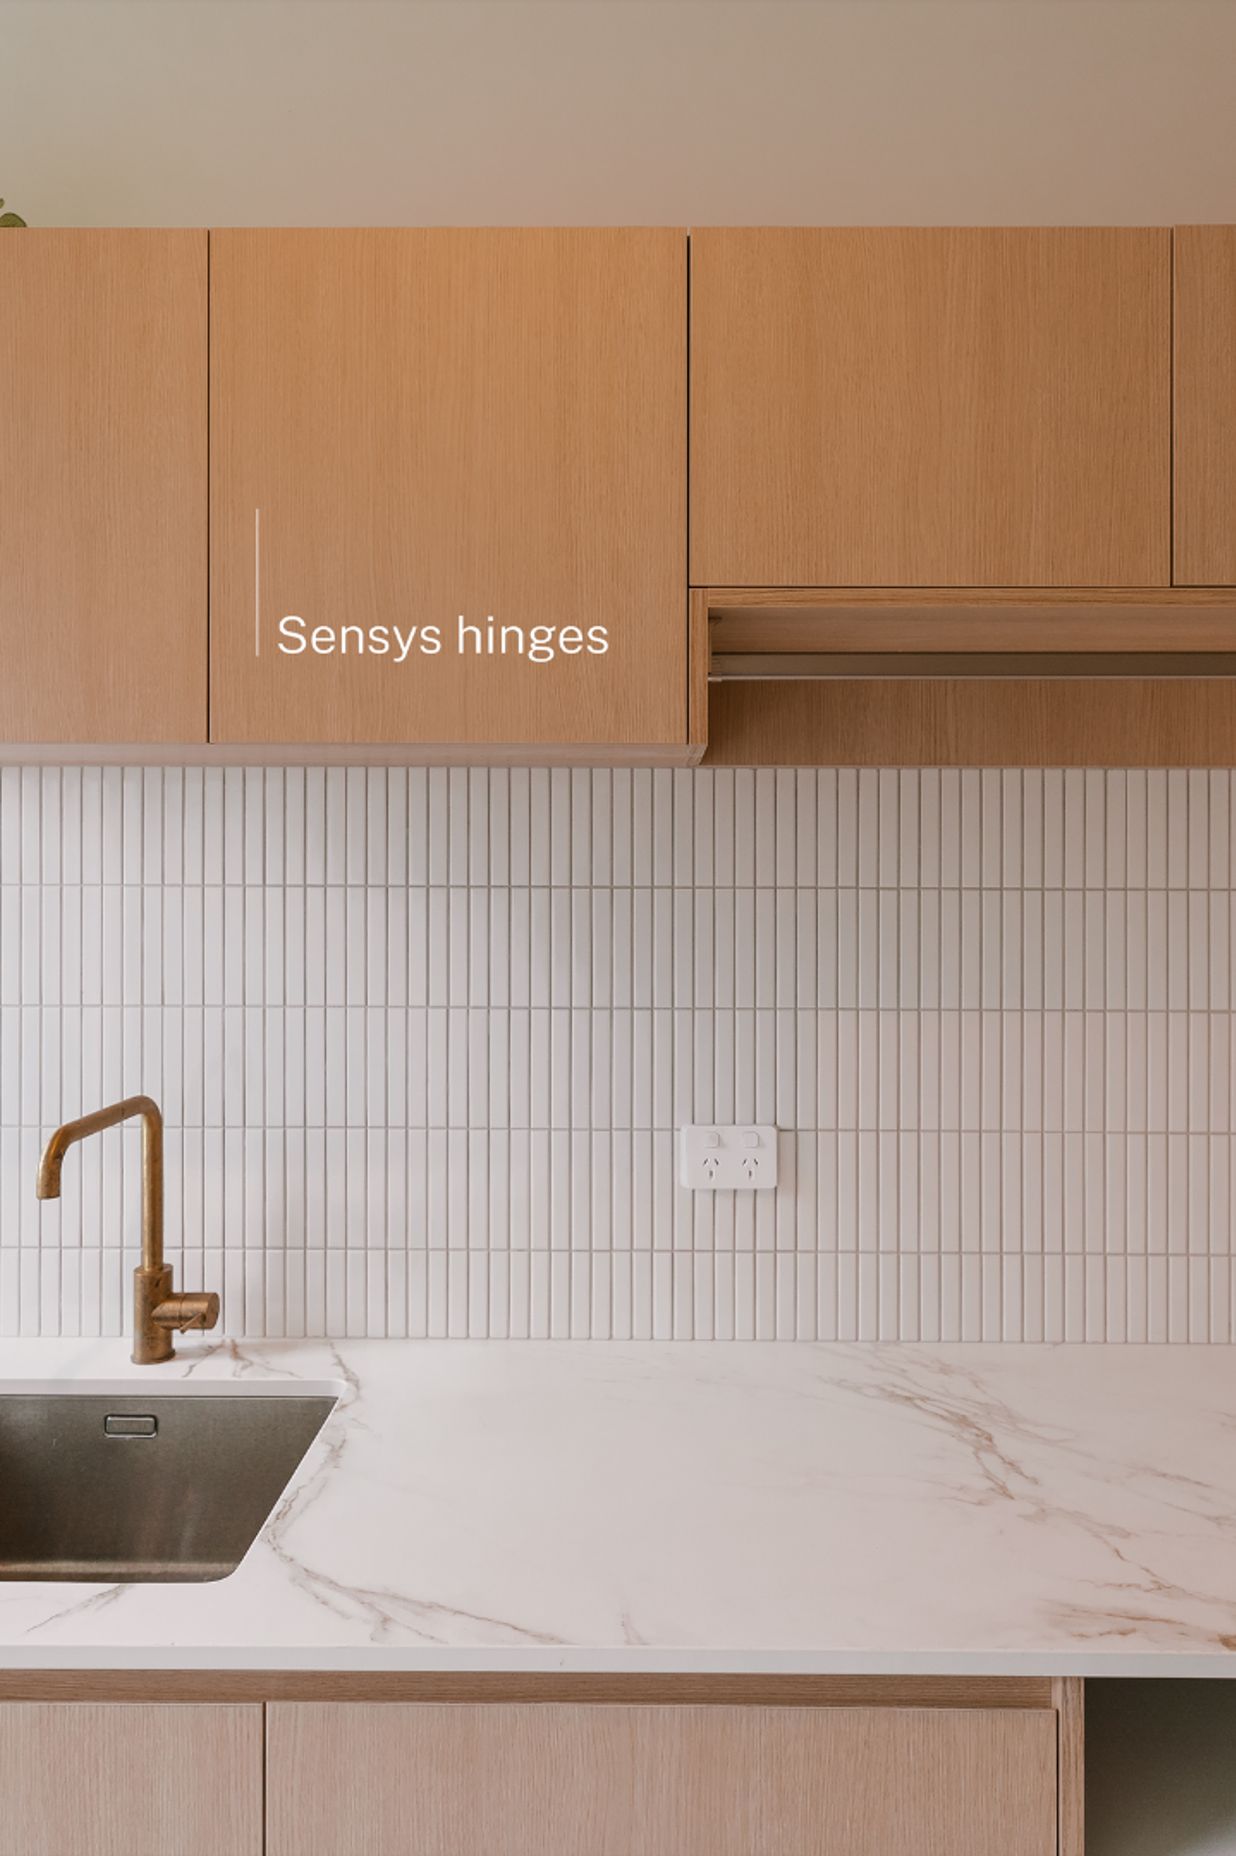 See the attention to detail with the alignment of the tiles and overhead cabinets. Once you have Sensys hinges you won't be able to live without them.